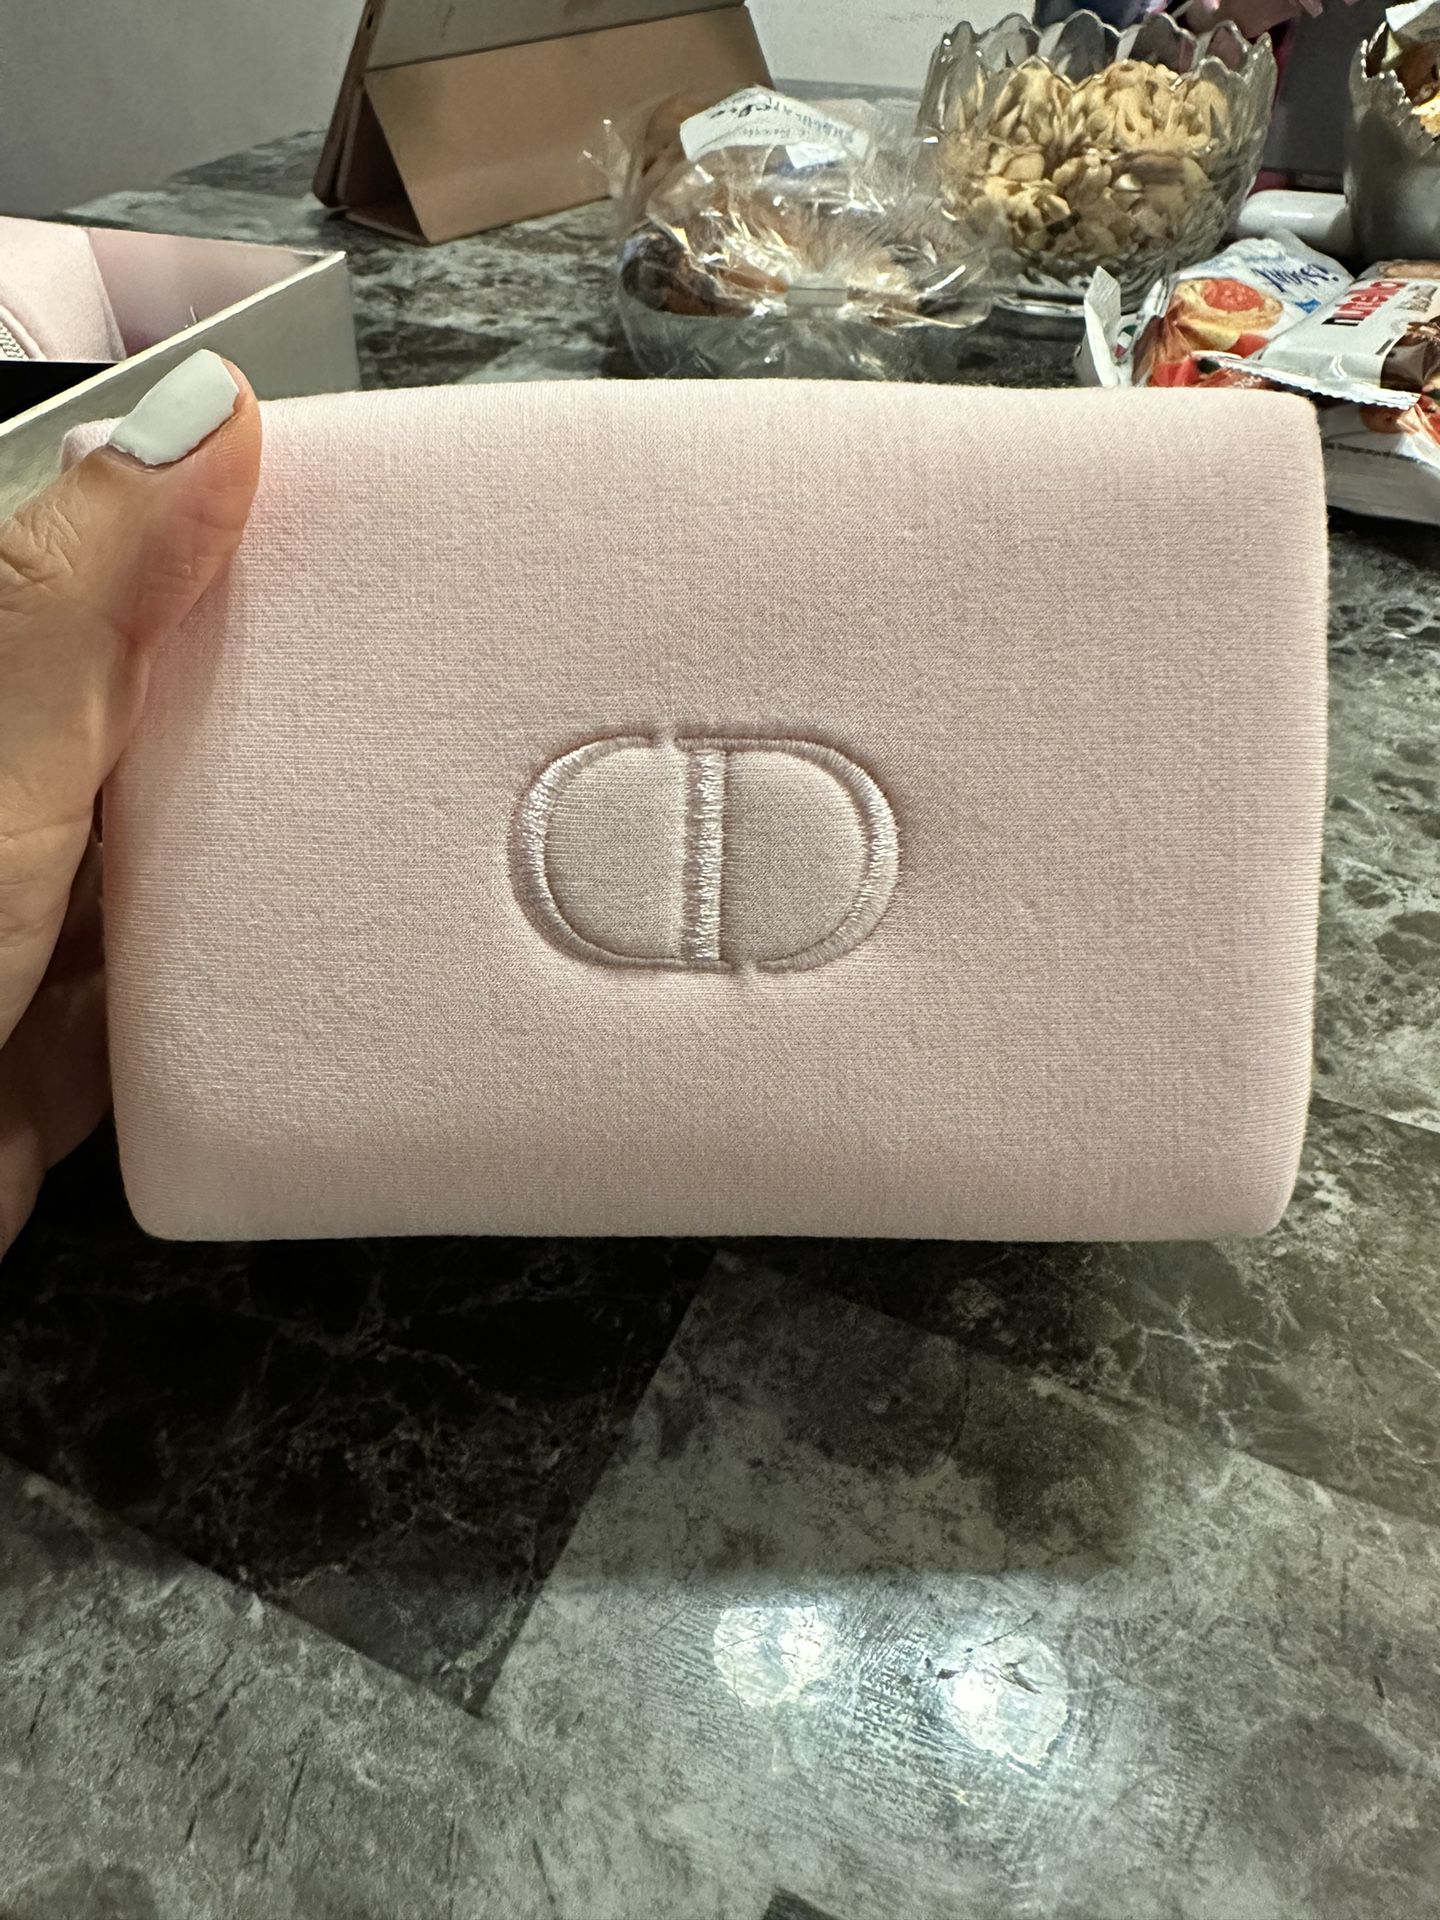 New Red Christian Dior MakeUp Bag for Sale in Boca Raton, FL - OfferUp